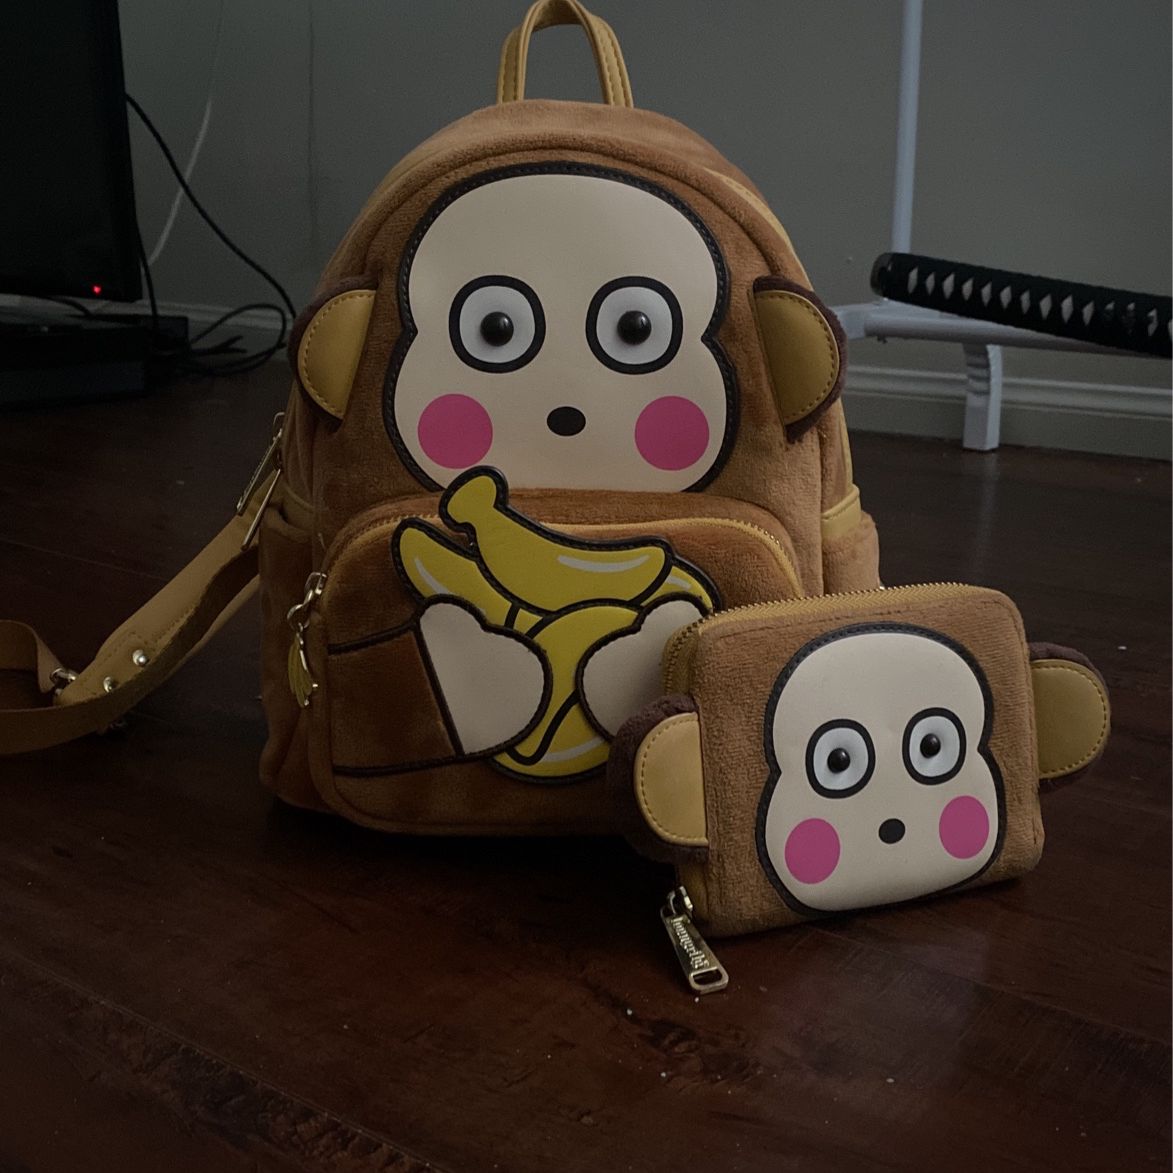 Sanrio Loungefly Monkichi Backpack and Wallet